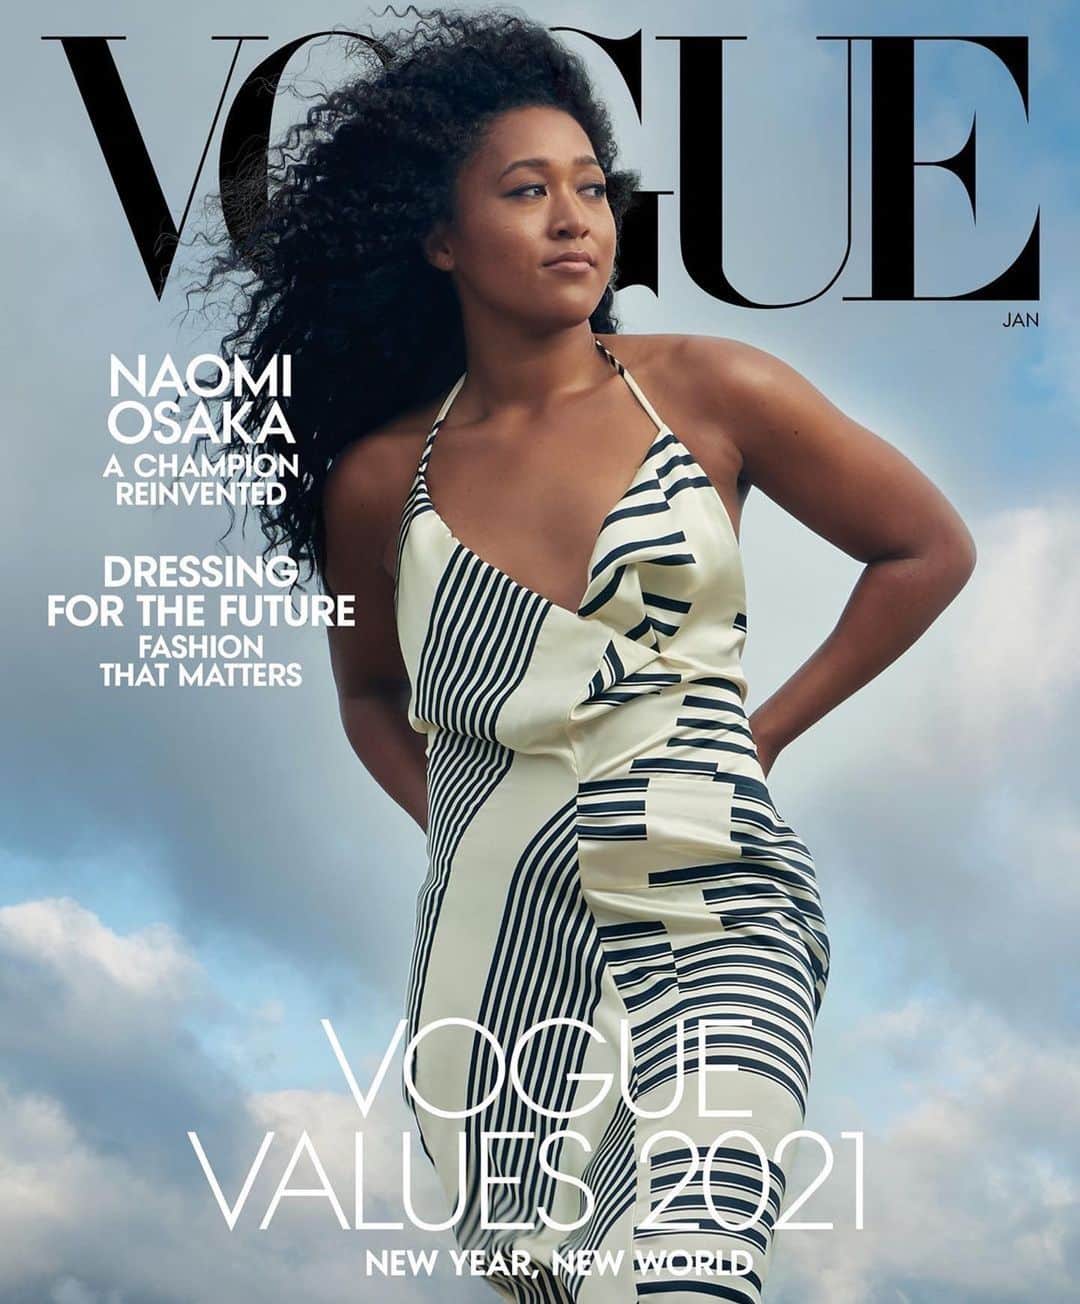 Lacy Redwayのインスタグラム：「This one is a bucket list moment for me.   My first  American Vogue covers shot by the legendary @annieleibovitz . 🙏🏾🙏🏾  Thank you, @naomiosaka @annieleibovitz @sergiokletnoy @jordenbickham , @alignpr @voguemagazine, and everyone involved for this opportunity. 🙏🏾   #HairByLacyRedway   Repost @voguemagazine ・・・ @naomiosaka is the second of our four January cover stars!  She’s won Grand Slams by making statements with her racket. But this summer @naomiosaka found another way to express herself.   Tap the link in our bio to meet tennis’s rising champion—and its conscience. Photographed by @annieleibovitz, styled by @jordenbickham, written by @robertjhaskell, Vogue, January 2021.」